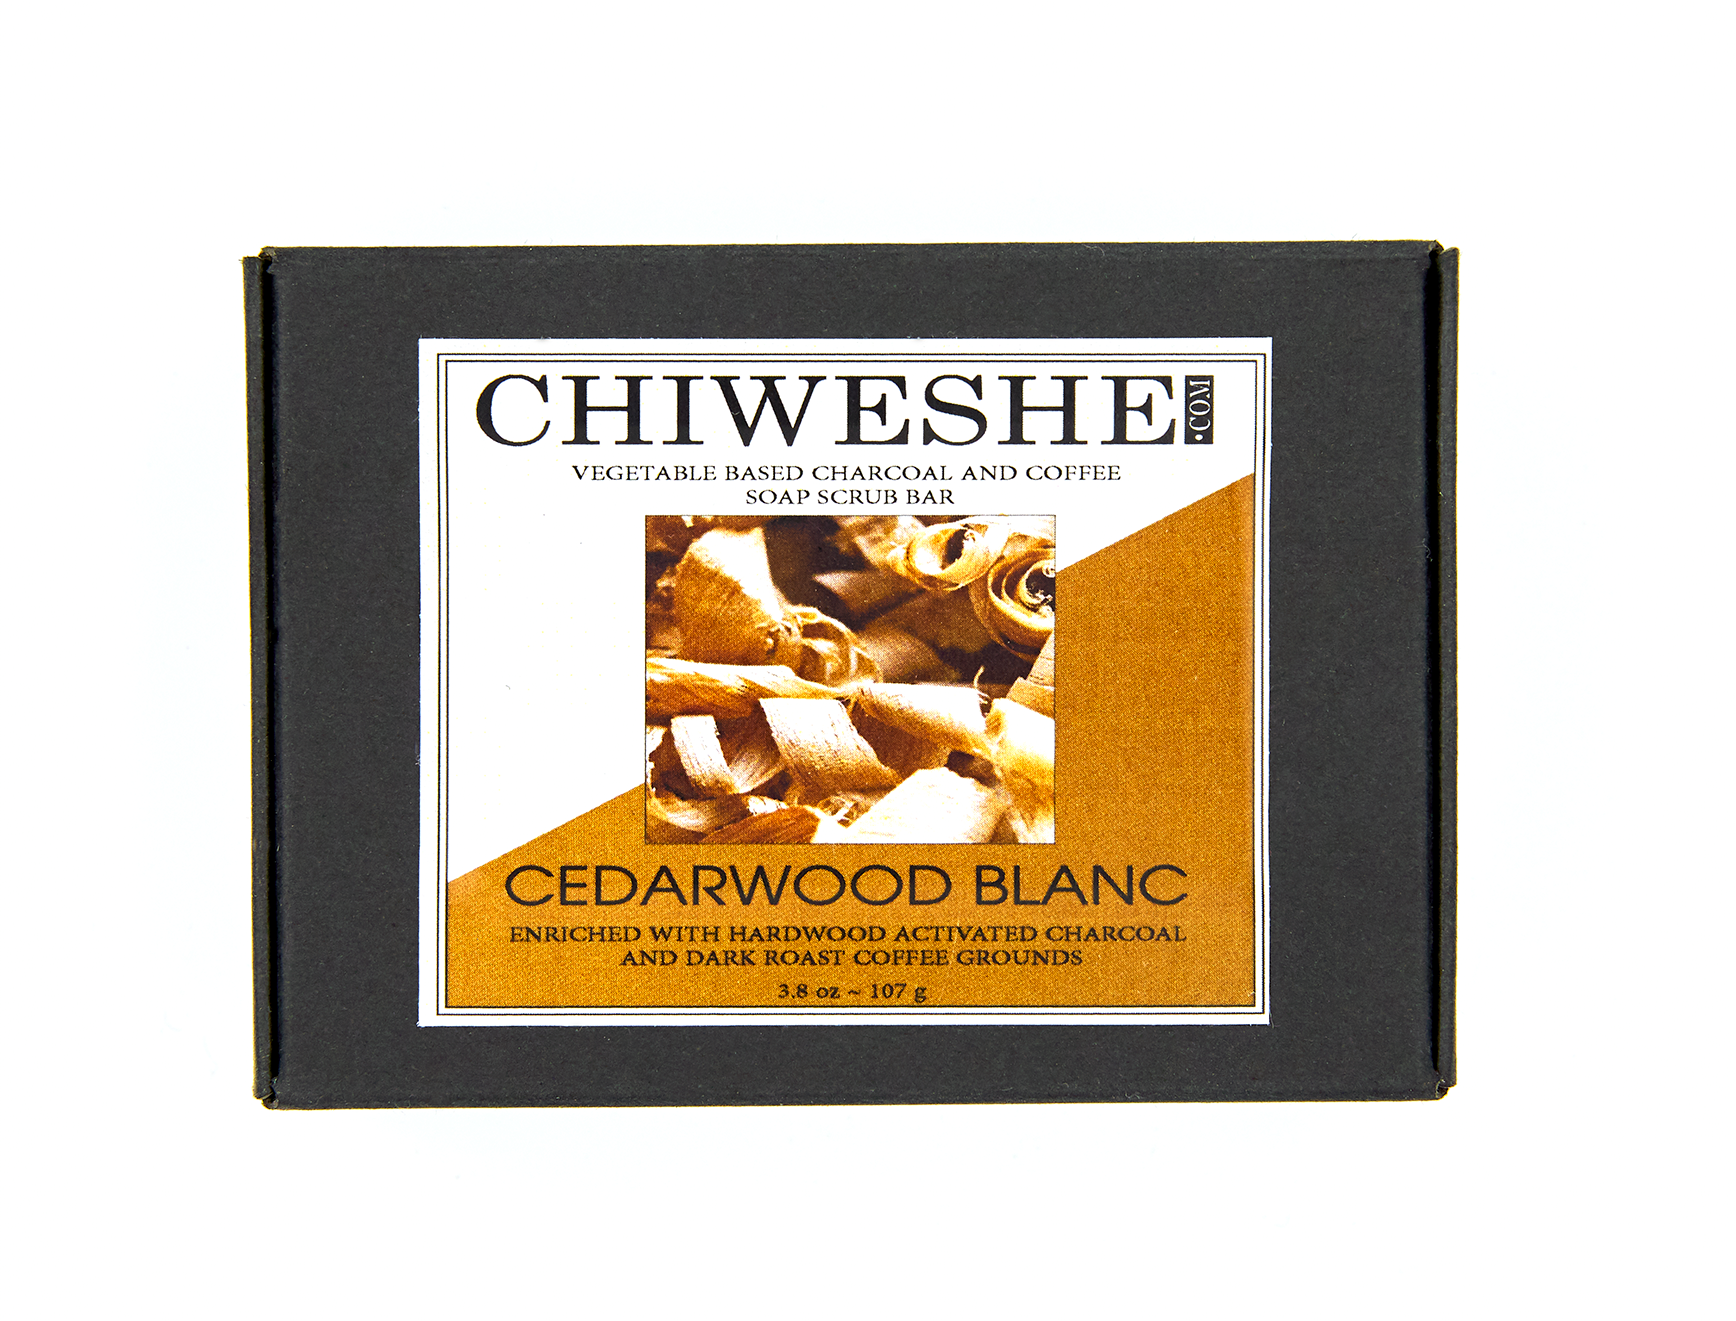 Cedarwood Blanc Hardwood Activated Charcoal & Coffee Soap Scrub Bars. Vegetable-Based, Hand-Made, Hand-Poured by Chiweshe.